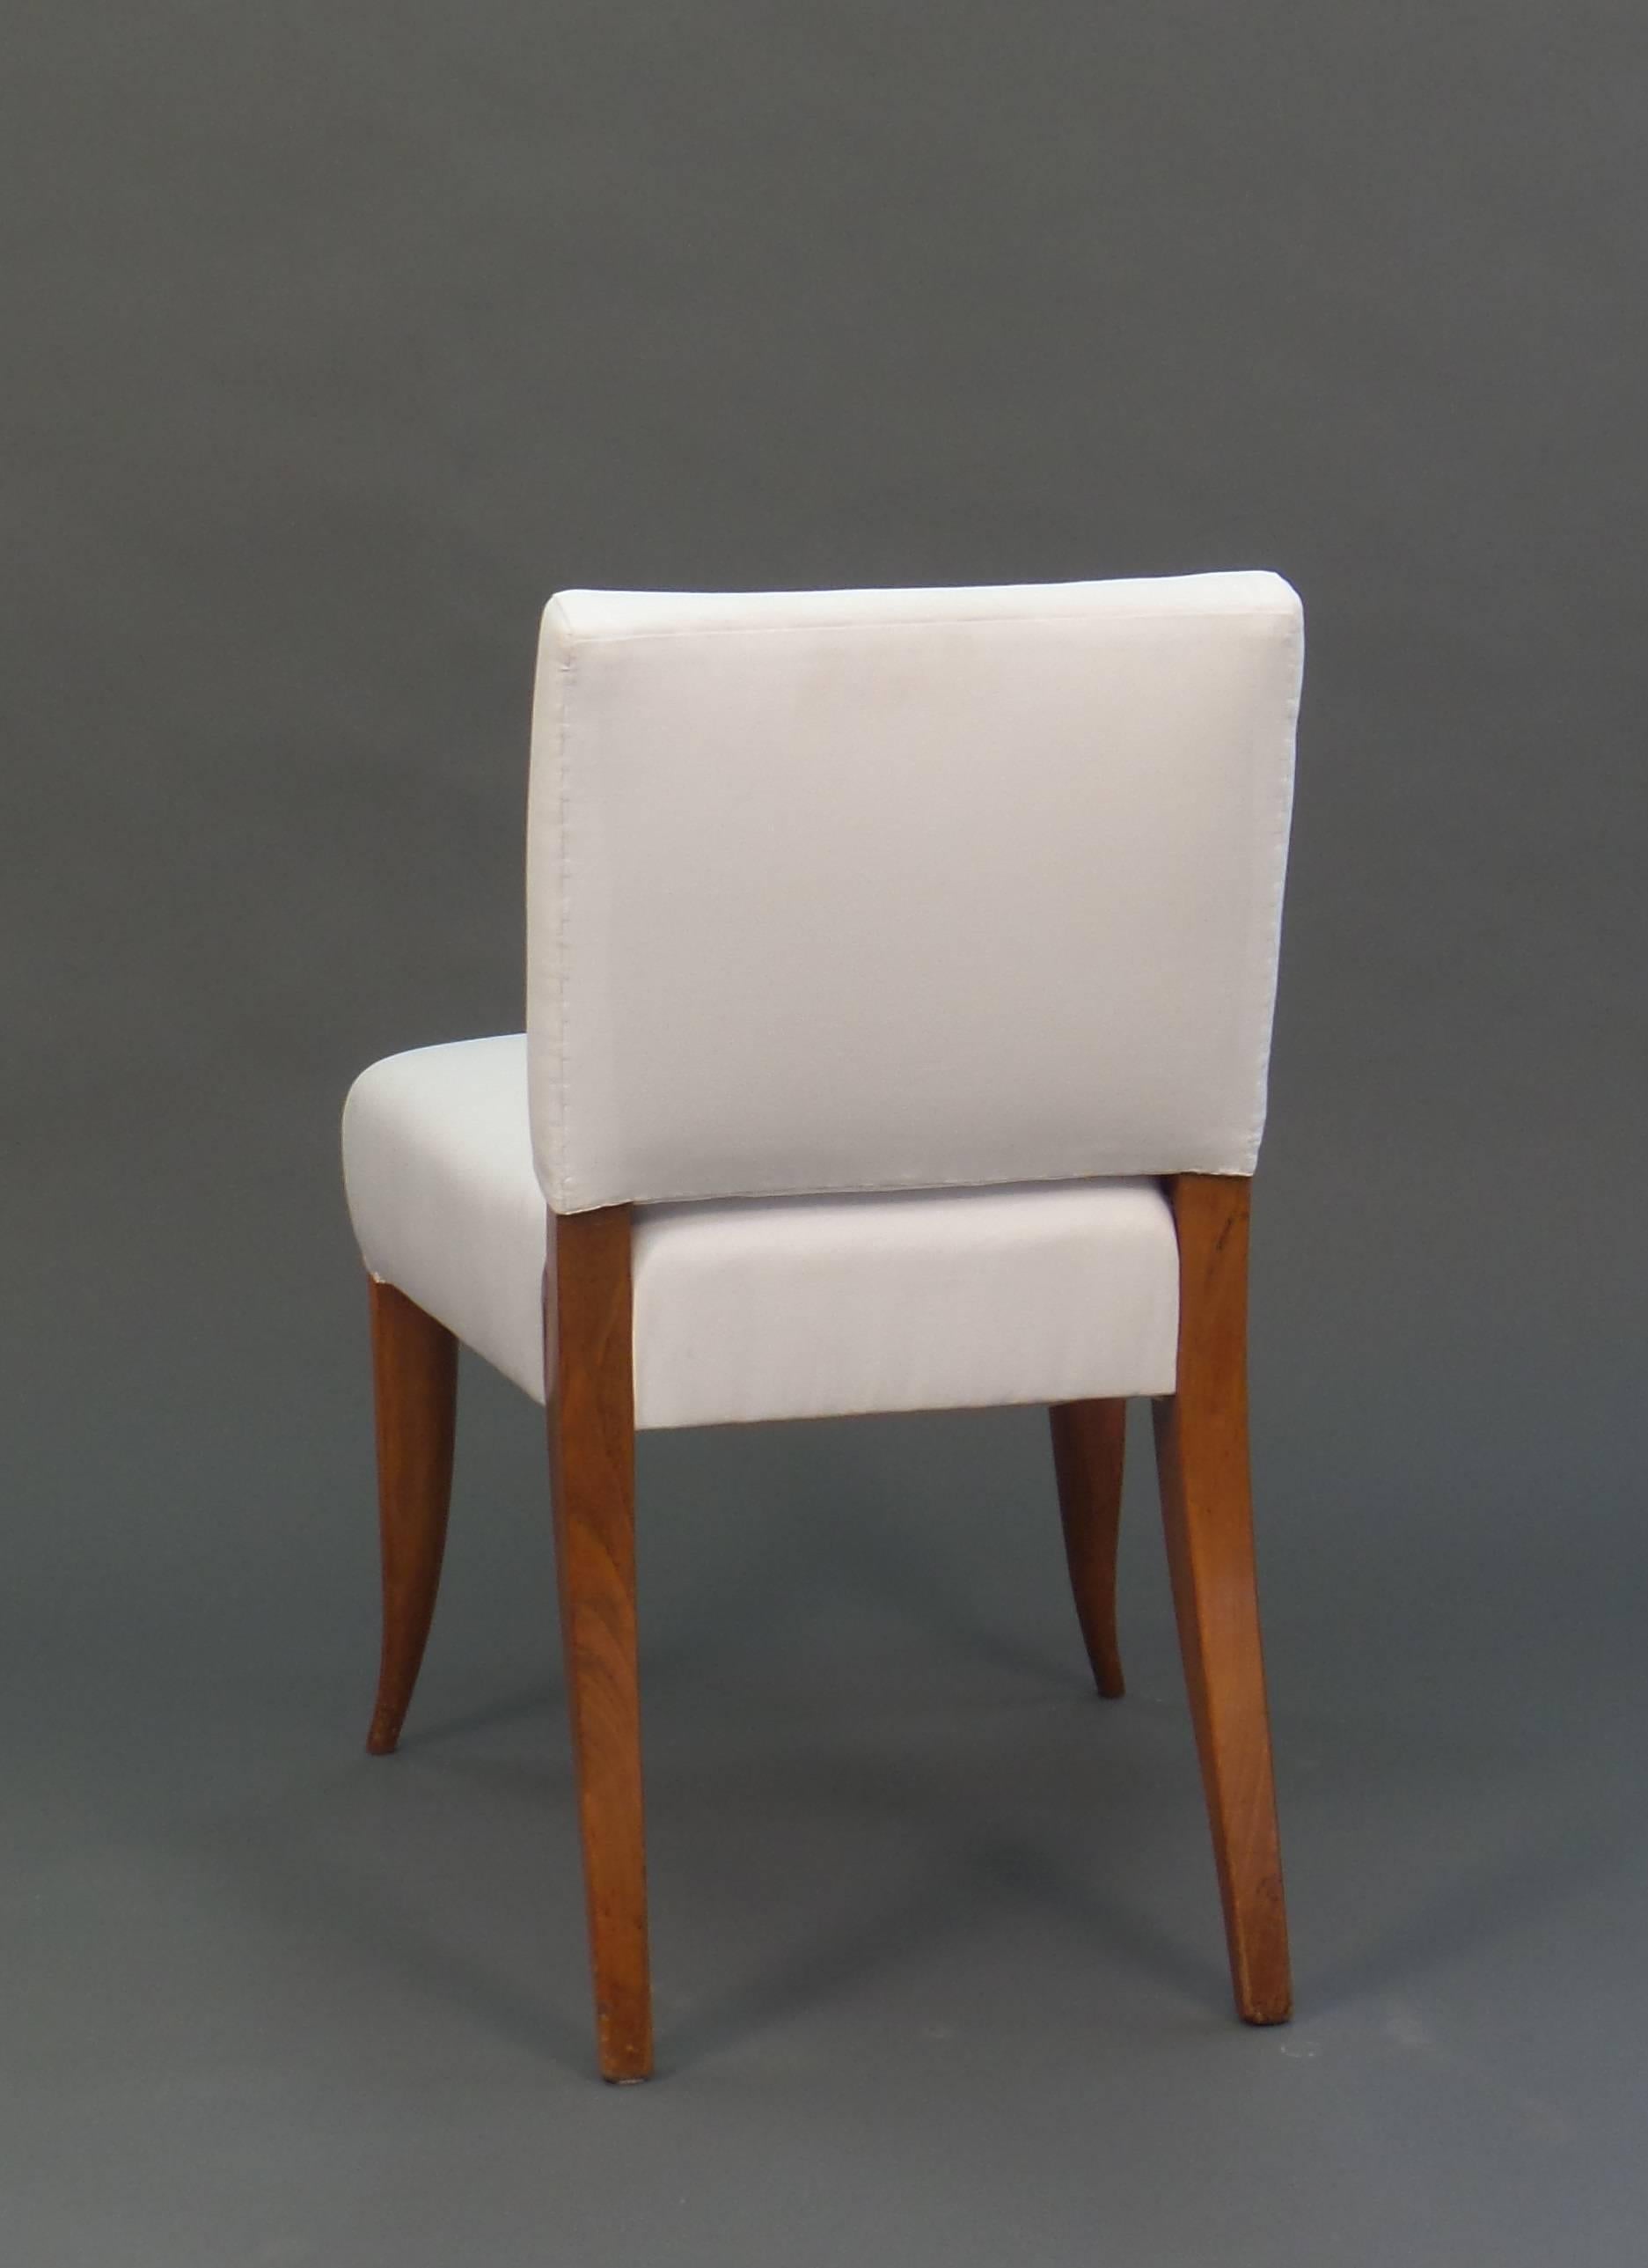 American Art Deco Style Dining Chair For Sale